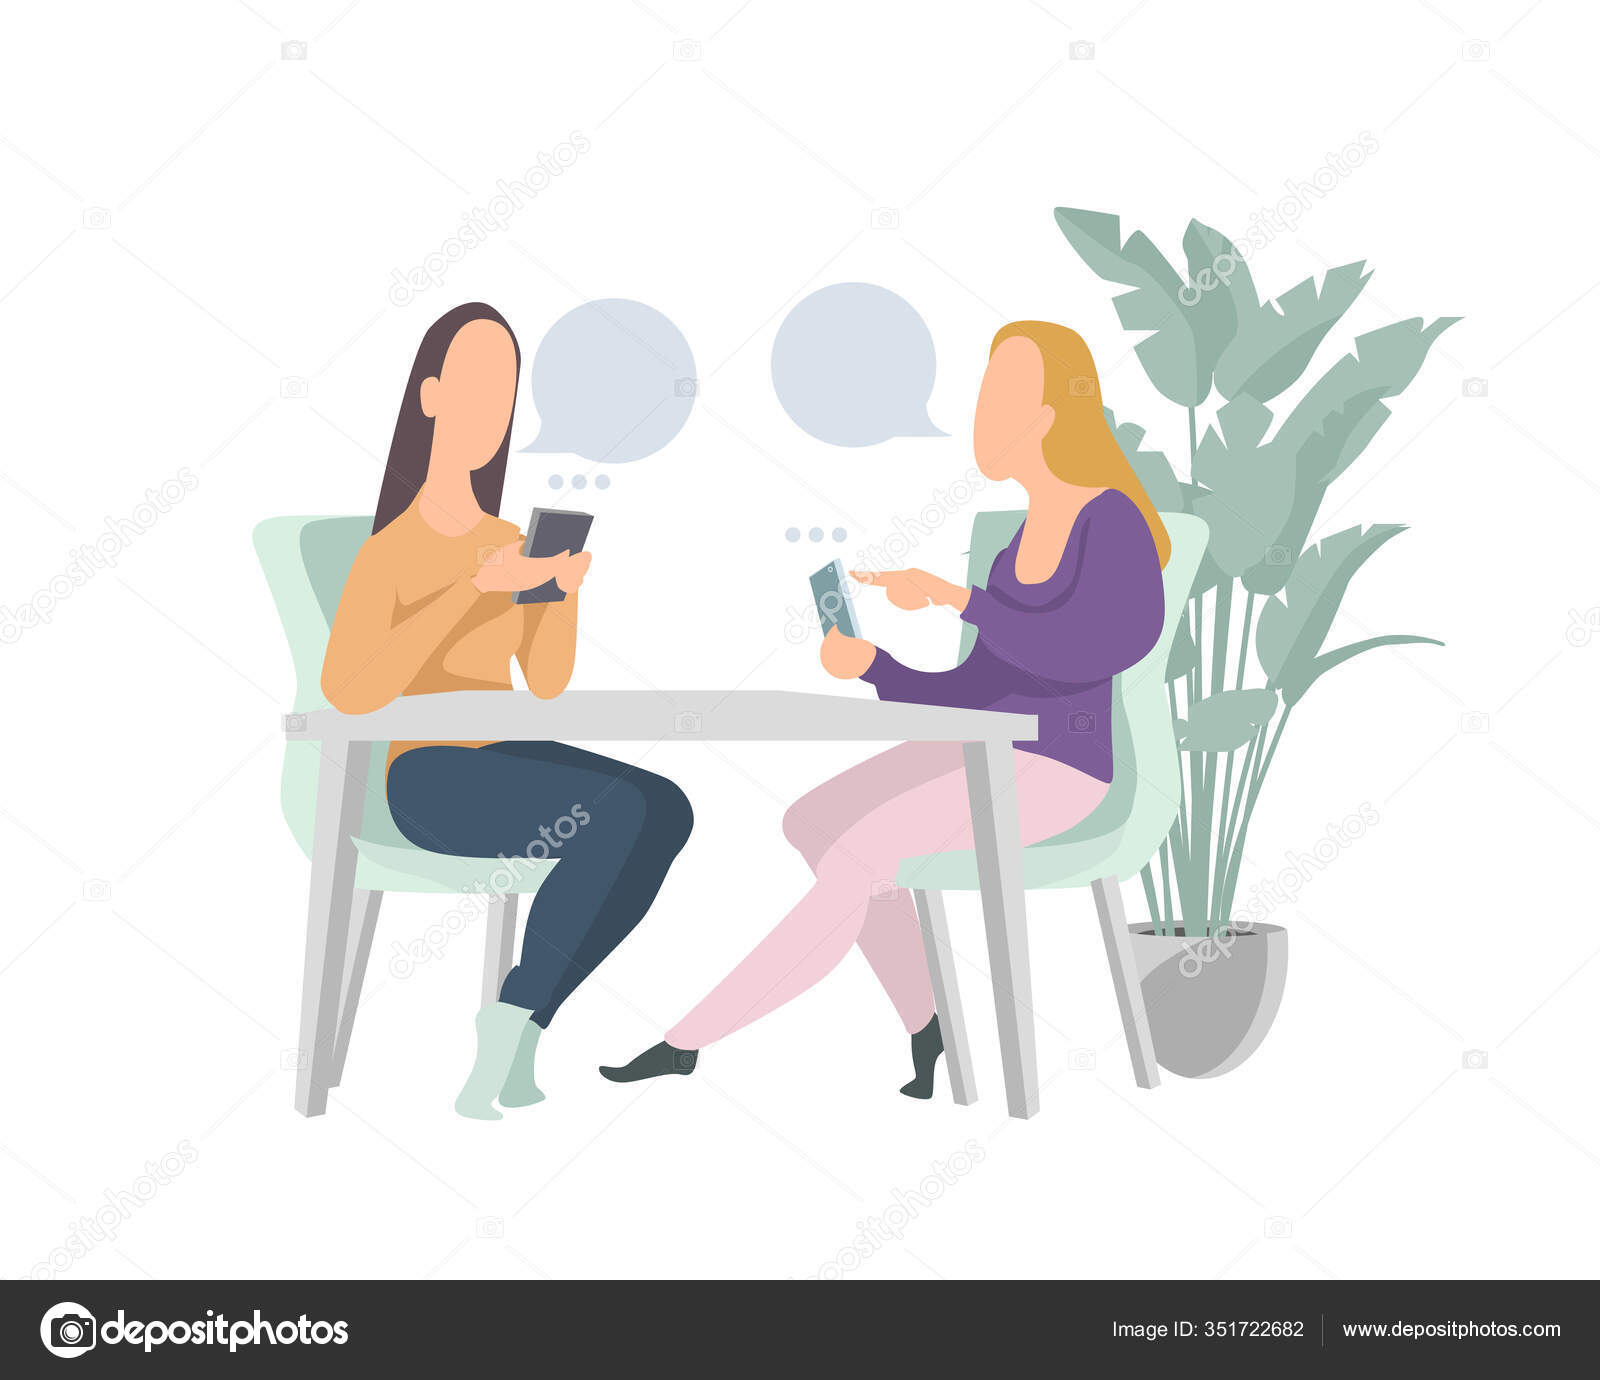 Online speaking concept chatting with friends Vector Image